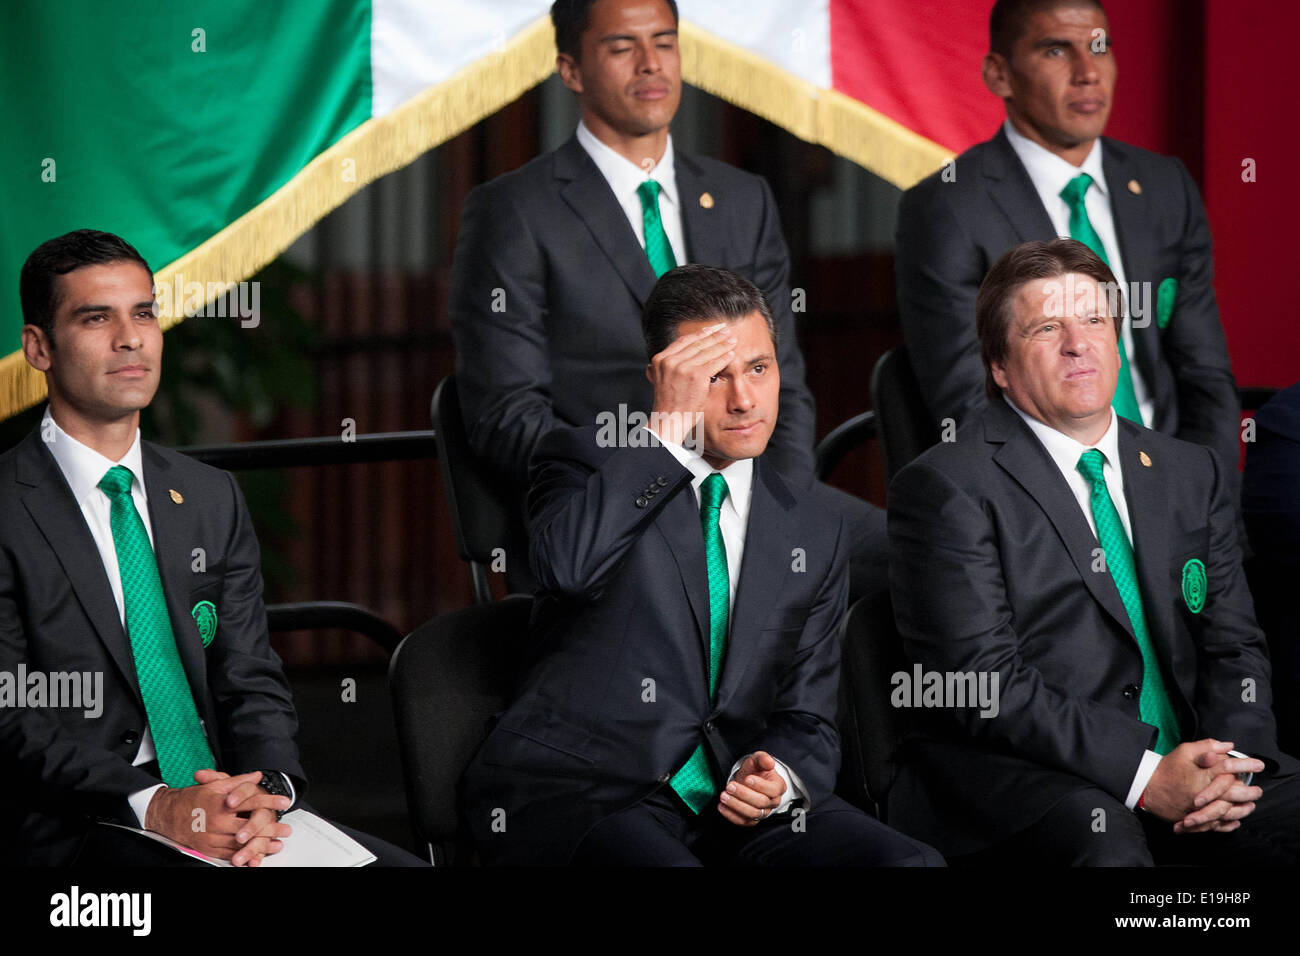 Mexico City, Mexico. 27th May, 2014. Mexico's President Enrique Pena Nieto (C), head coach Miguel Herrera (R) and player Rafael Marquez (L) of Mexico's national soccer team react during the flag ceremony for the 2014 Brazil World Cup in the central patio of the National Palace, in Mexico City, capital of Mexico, on May 27, 2014. Credit:  Pedro Mera/Xinhua/Alamy Live News Stock Photo